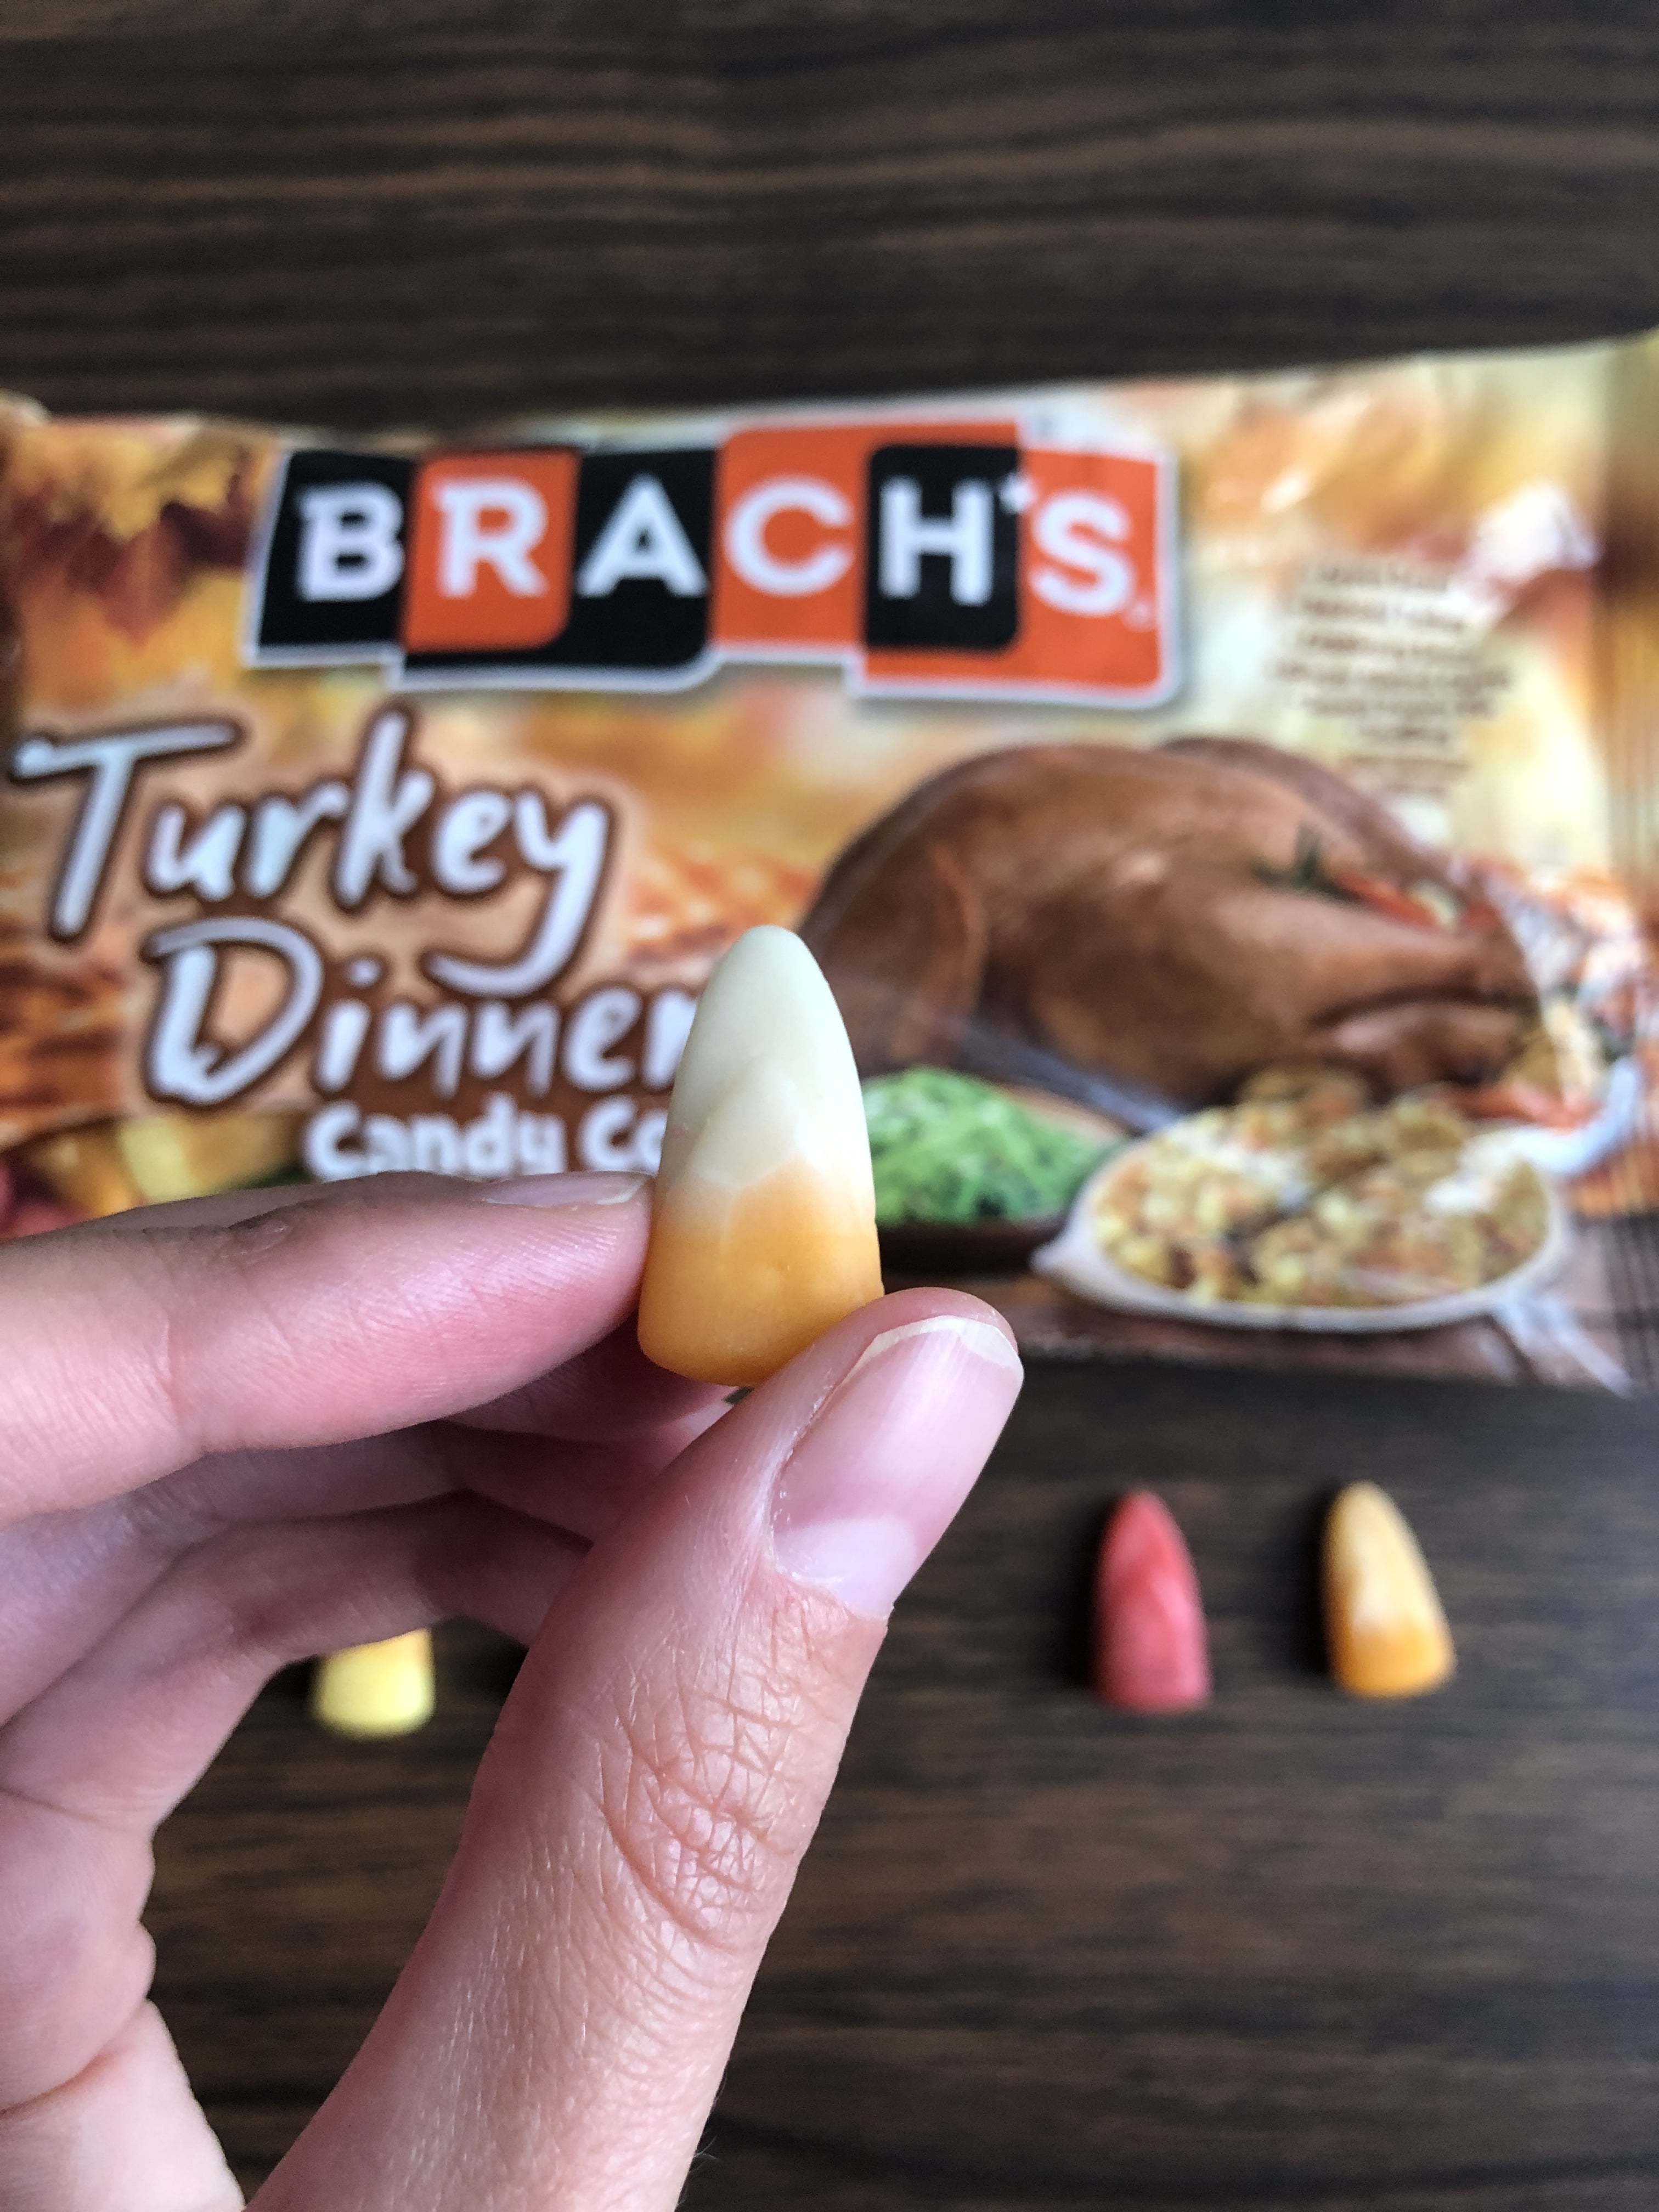 REVIEW: Brach's Cookie Candy Corn - The Impulsive Buy